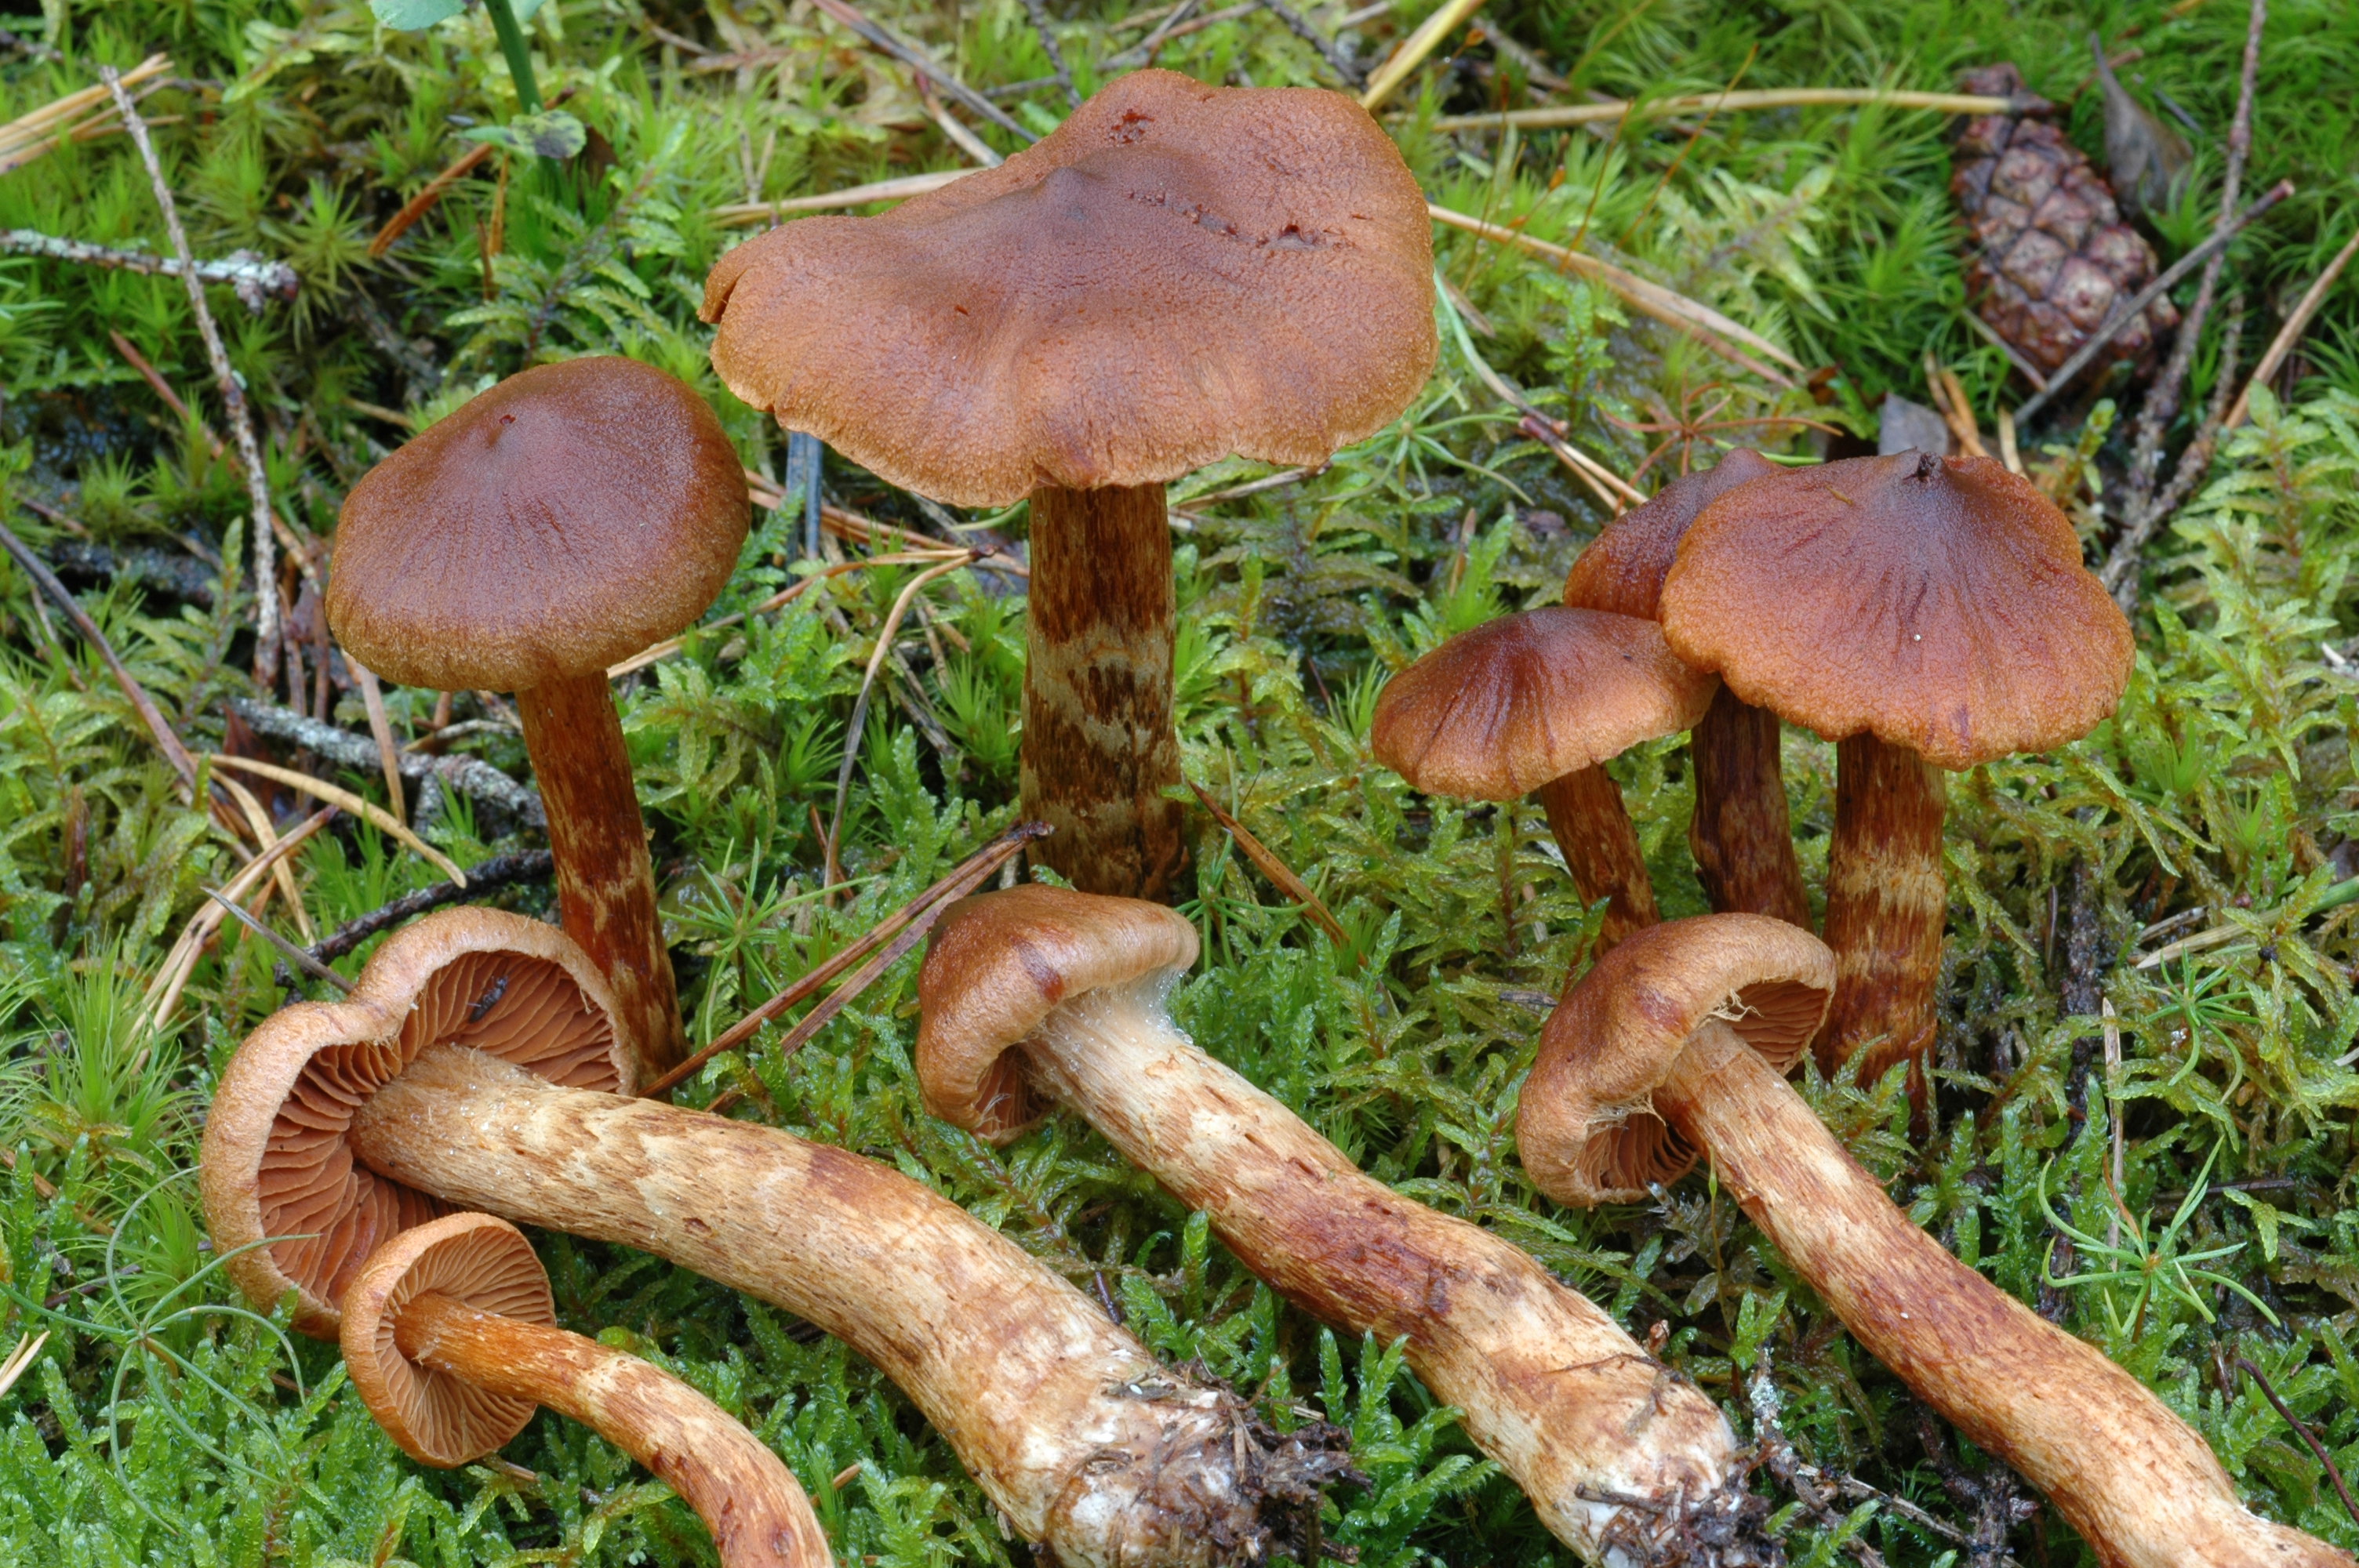 Examples of deadly webcap mushrooms with reddish-brown caps, stipes and gills.